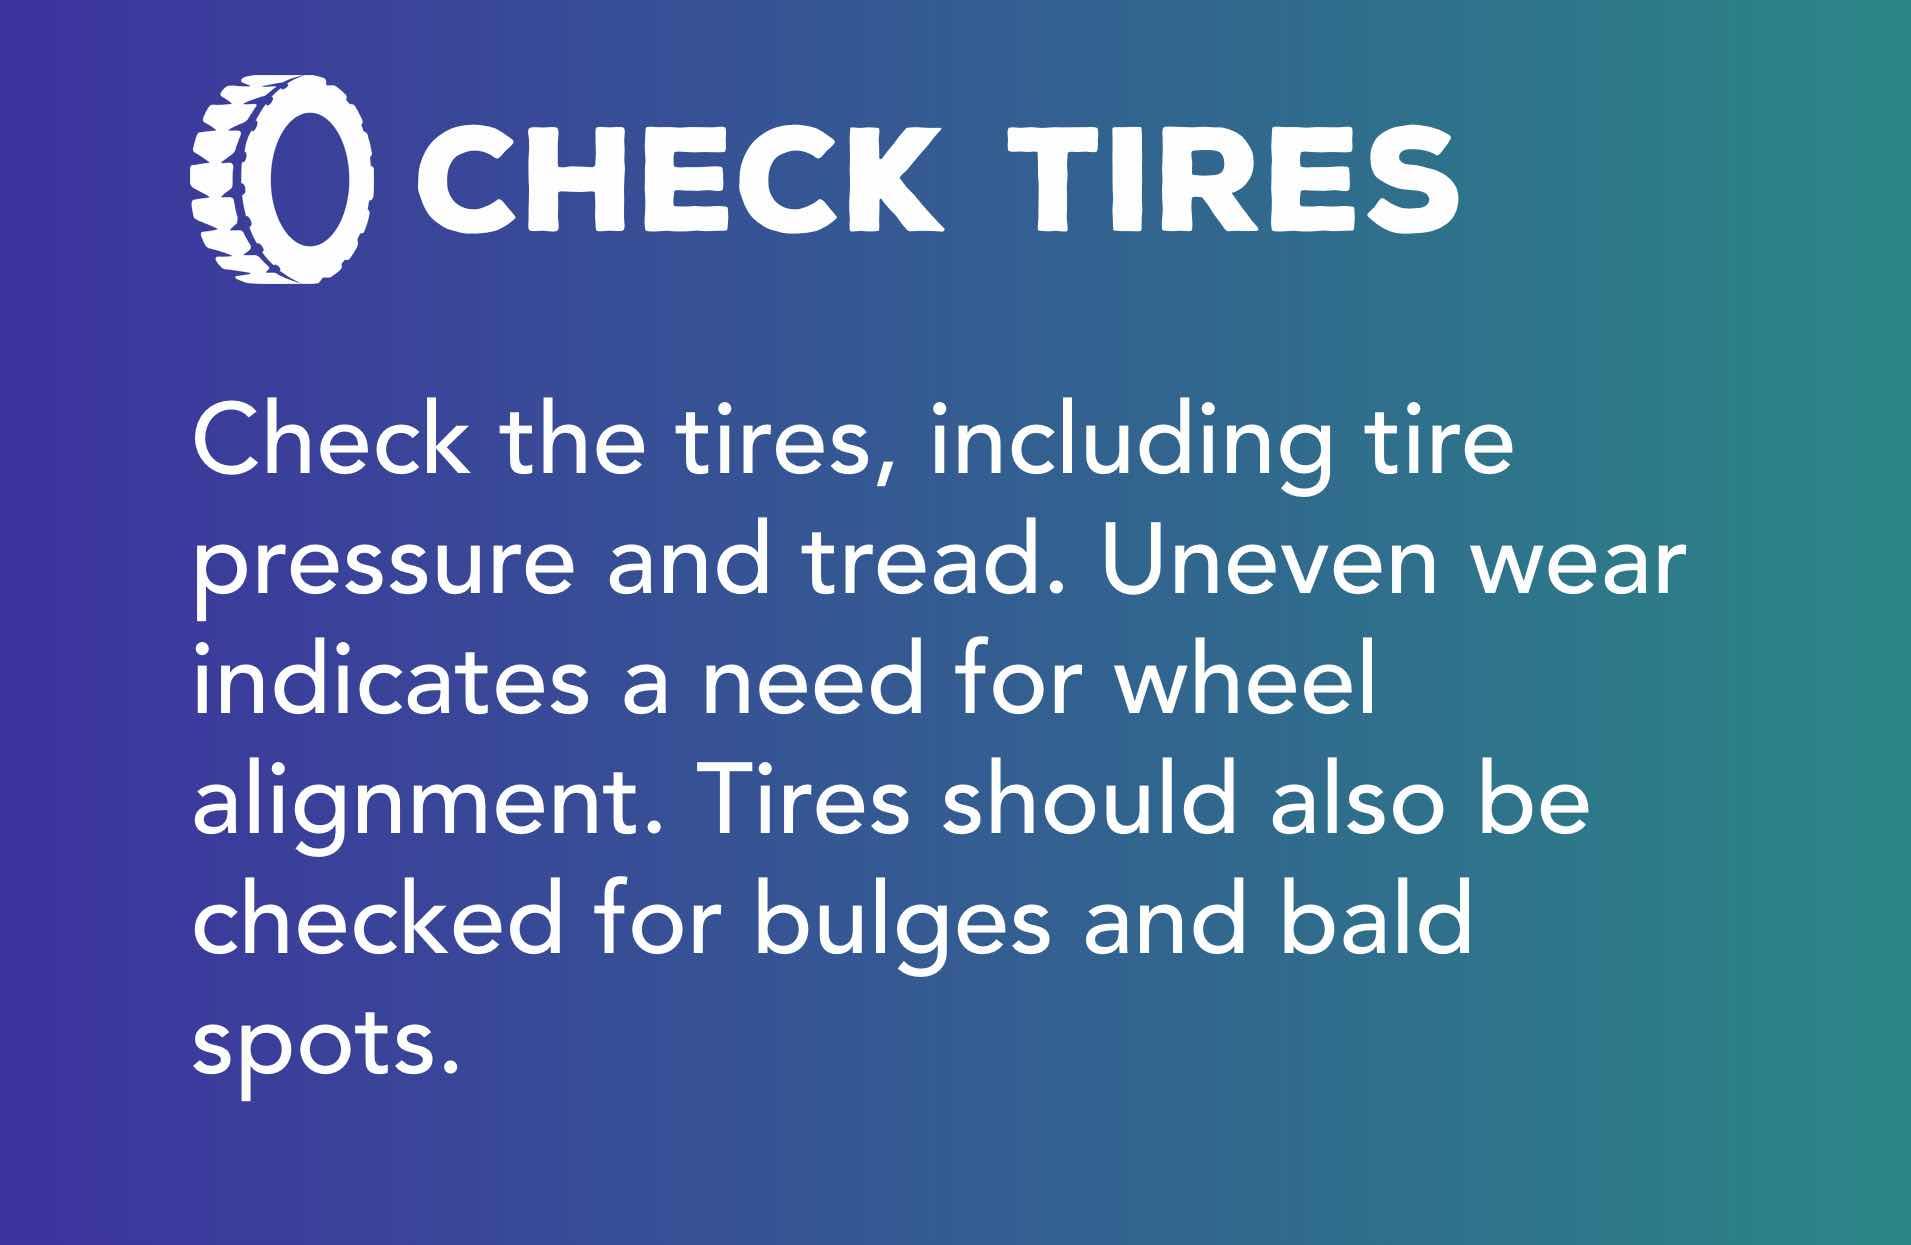 Check the tires, including tire pressure and tread. Uneven wear indicates a need for wheel alignment. Tires should also be checked for bulges and bald spots.